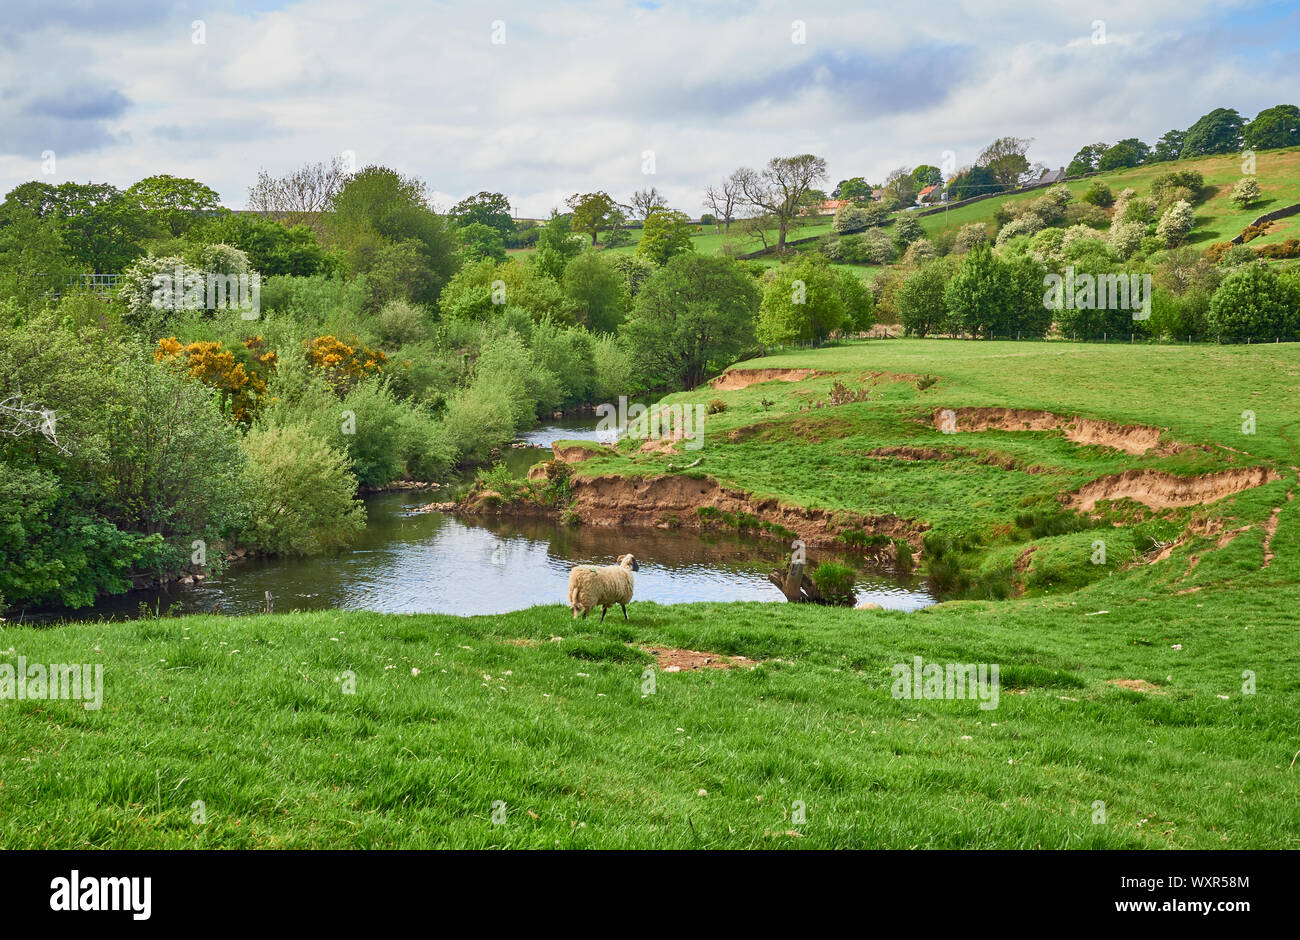 A rural landscape scene of a tree lined river with sheep and a grassy meadow in North Yorkshire, England Stock Photo